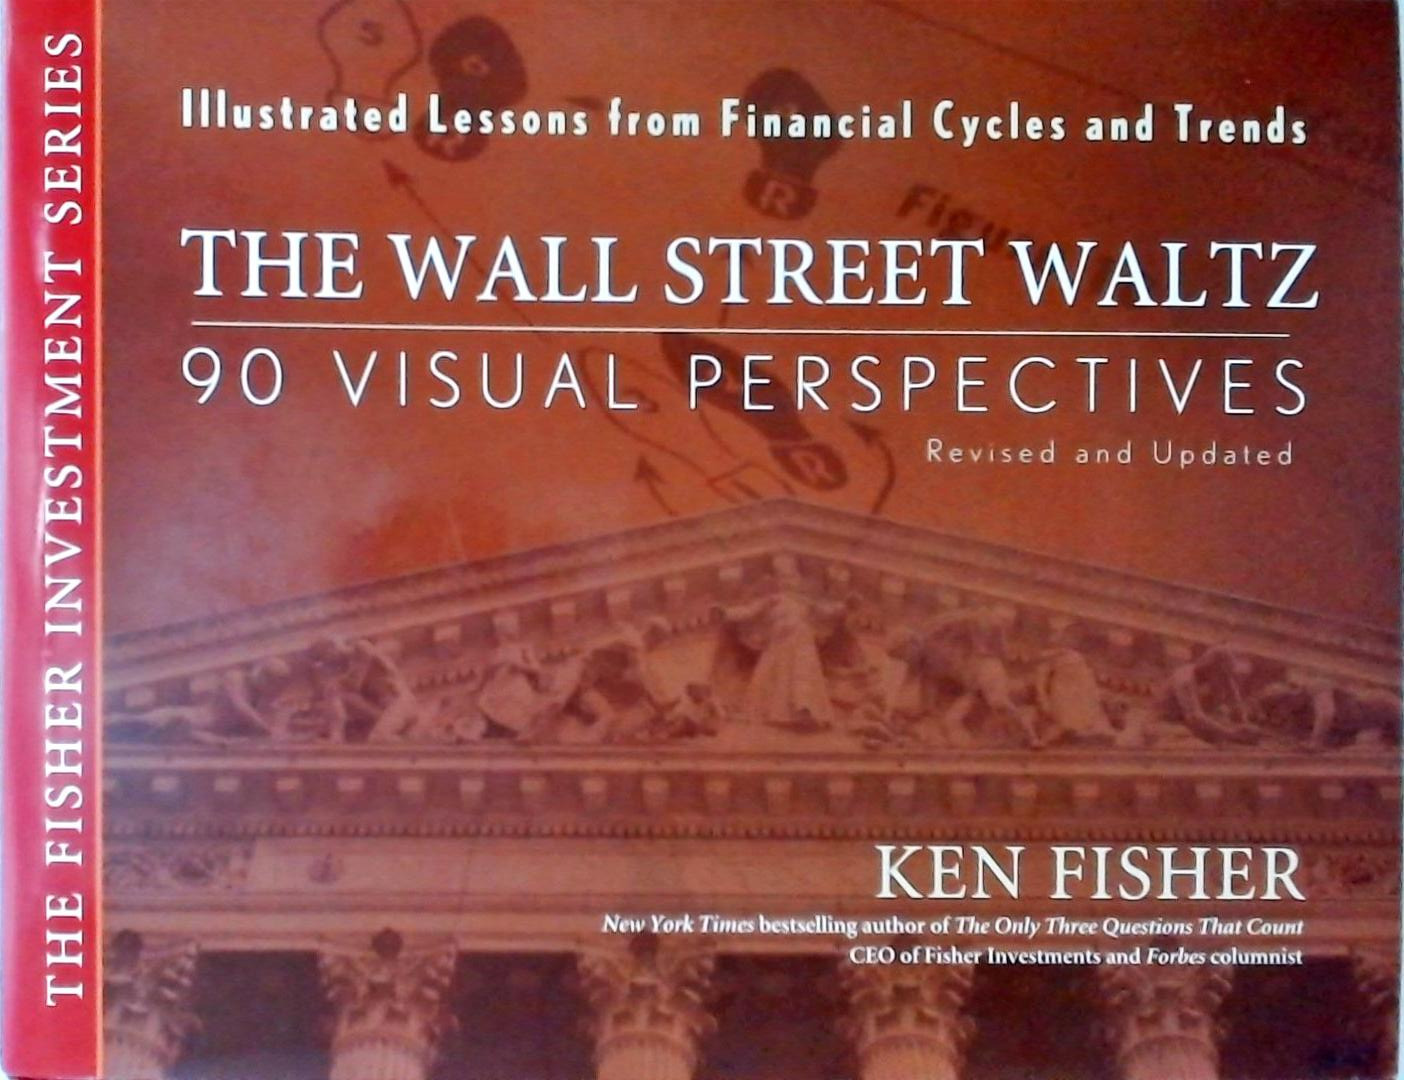 The Wall Street Waltz - 90 Visual Perspectives